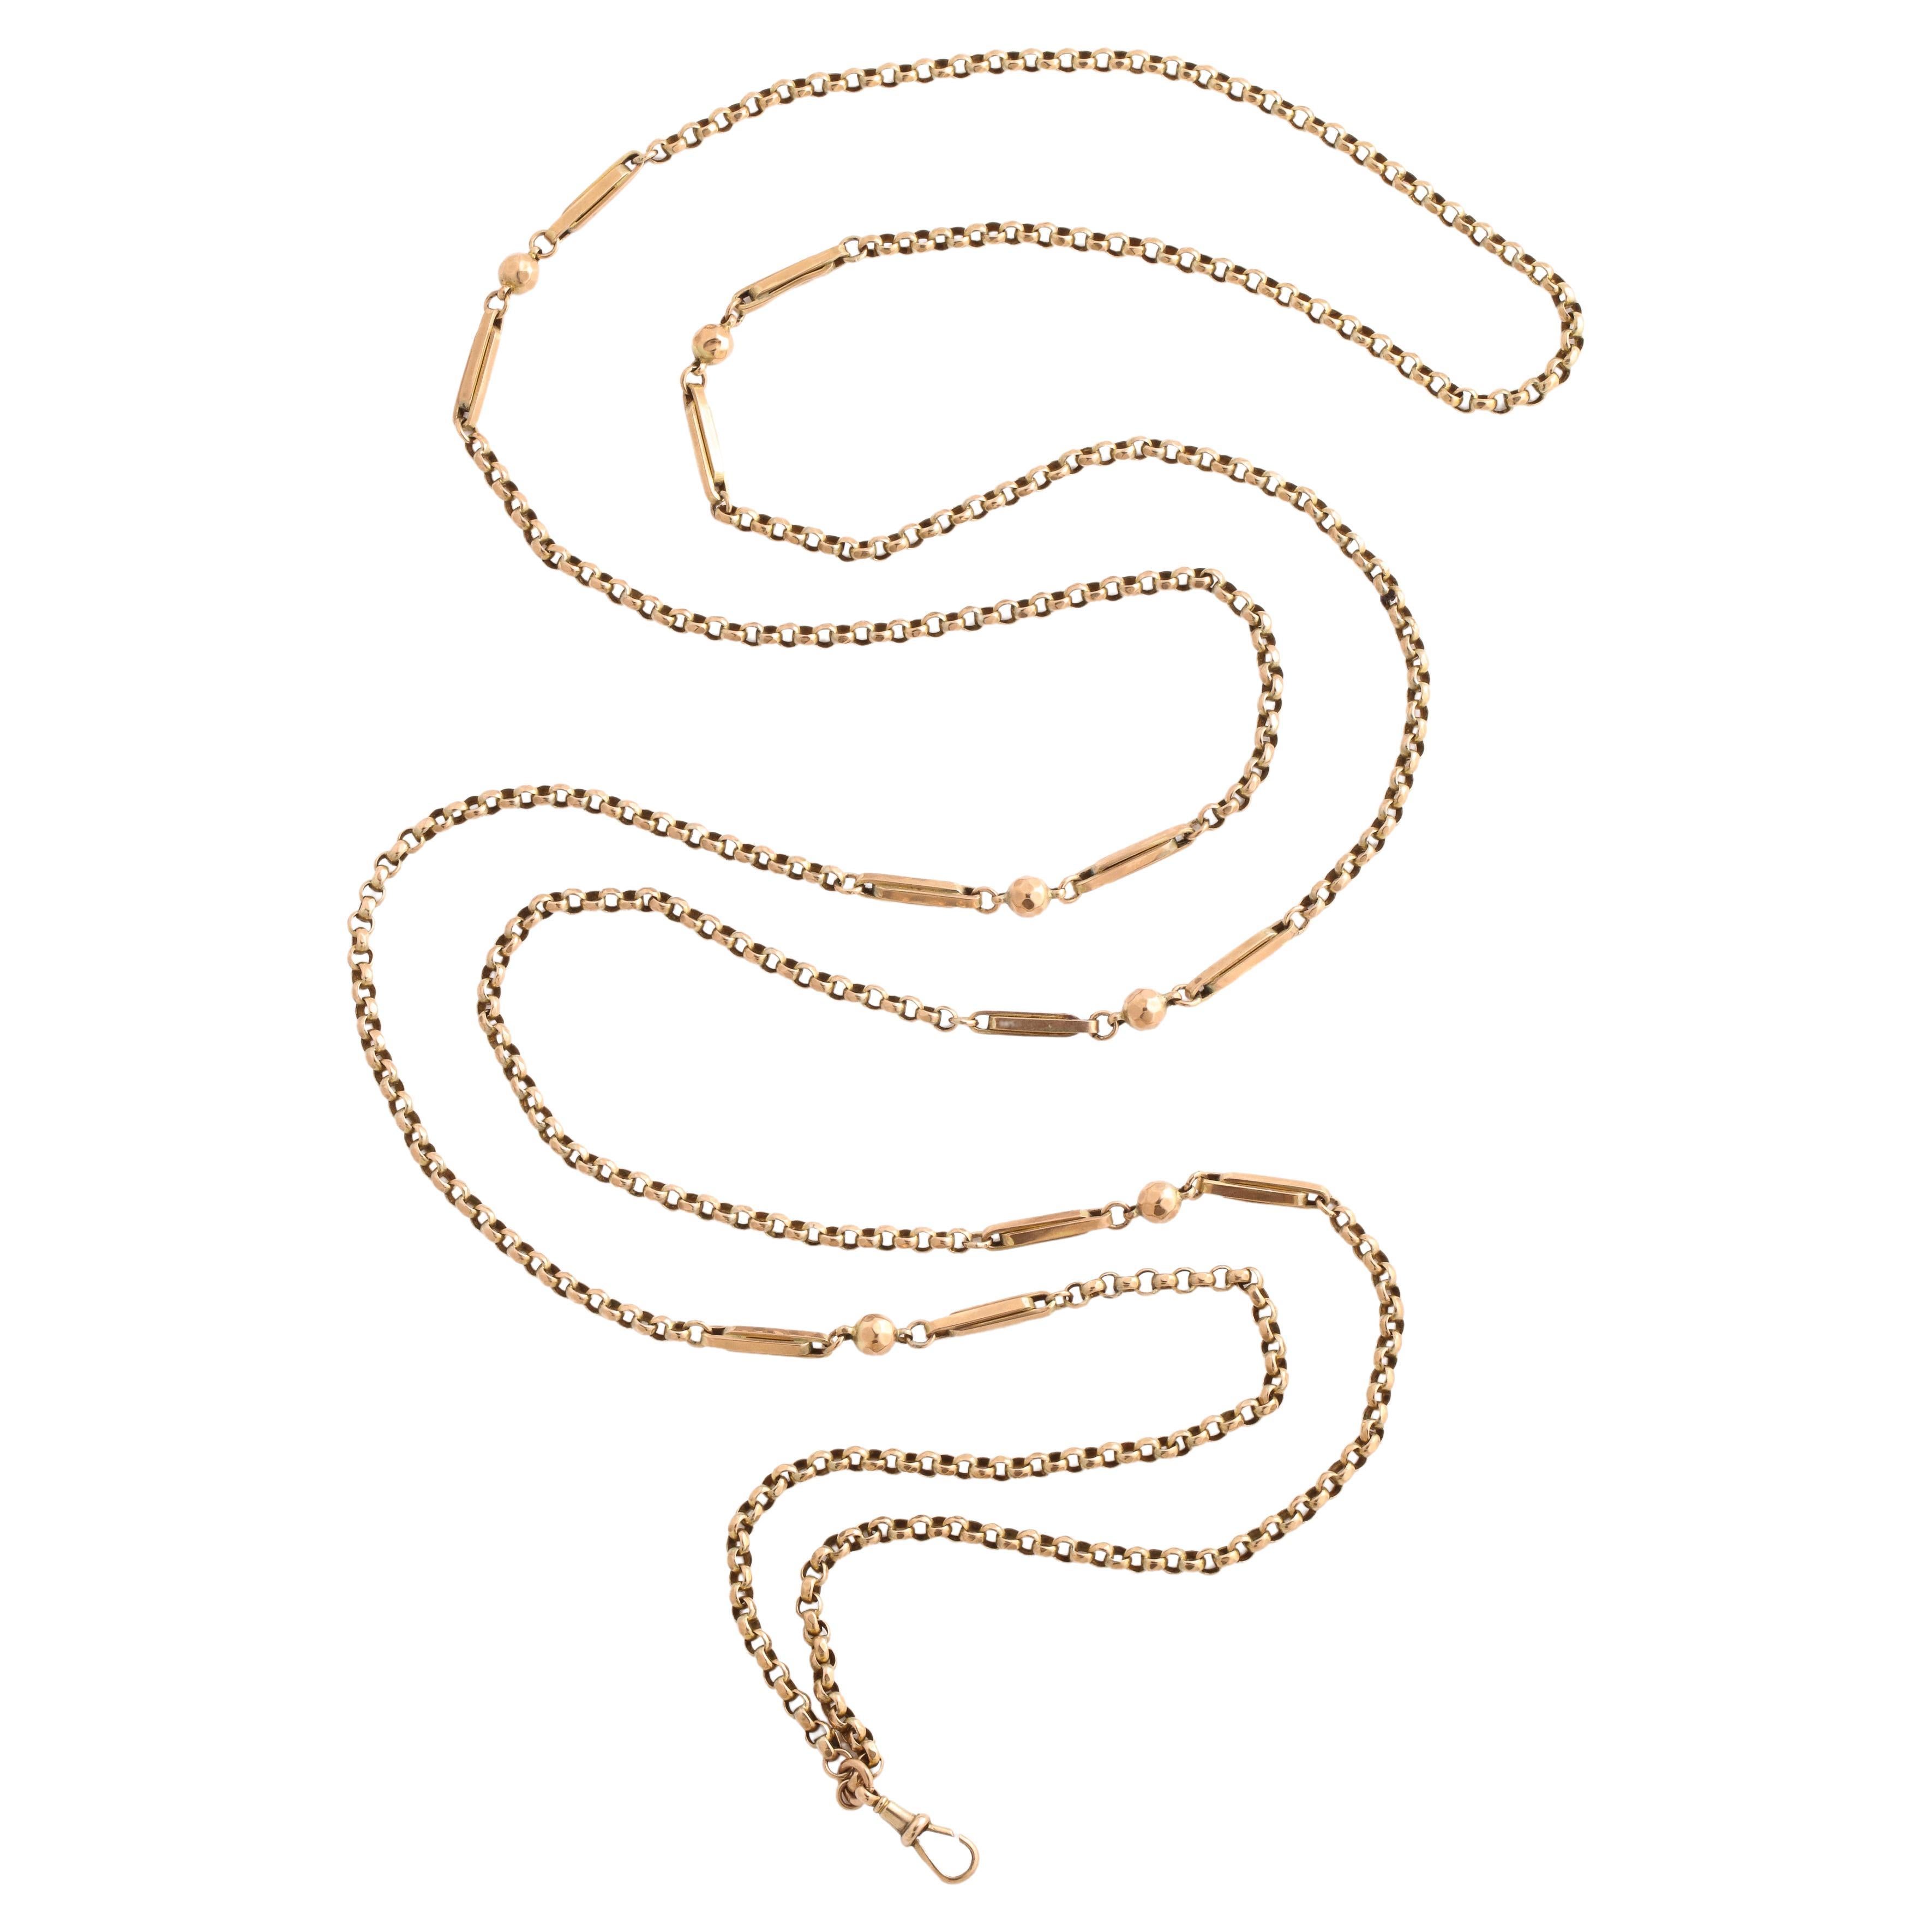 A 32.5 gram Victorian 15 Kt gold long guard chain with beveled beads, tubular links and round links that alternate horizontally and vertically. The chain is greater in texture than are plain chains because of the variety of links. At a grand 60